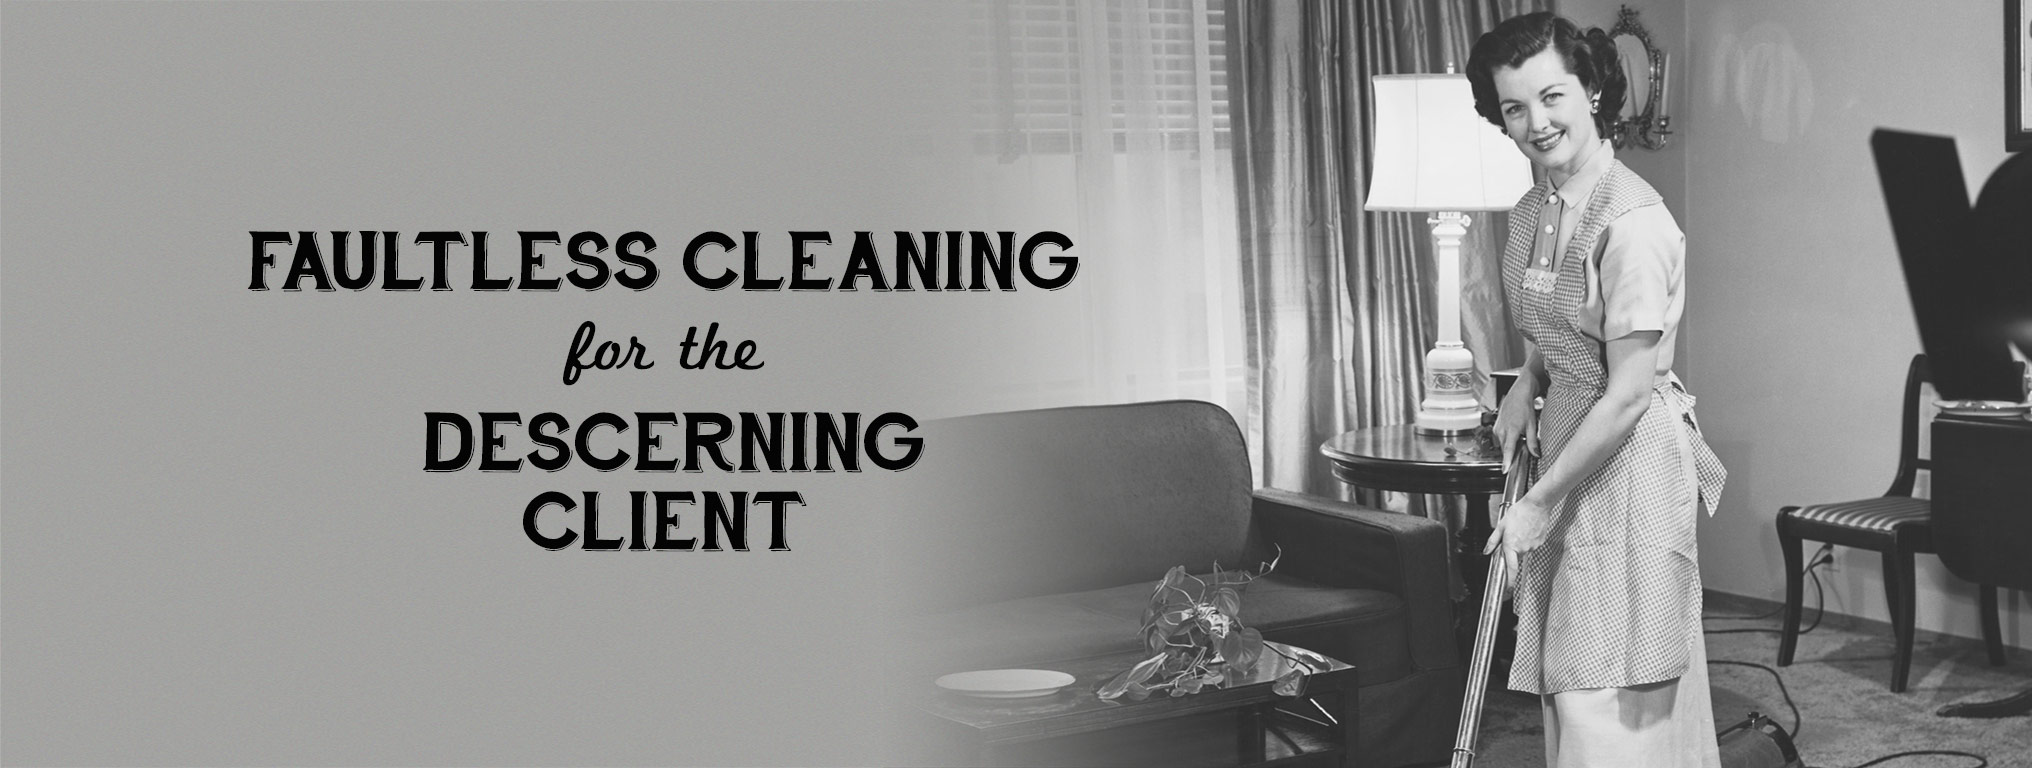 Faultless Cleaning